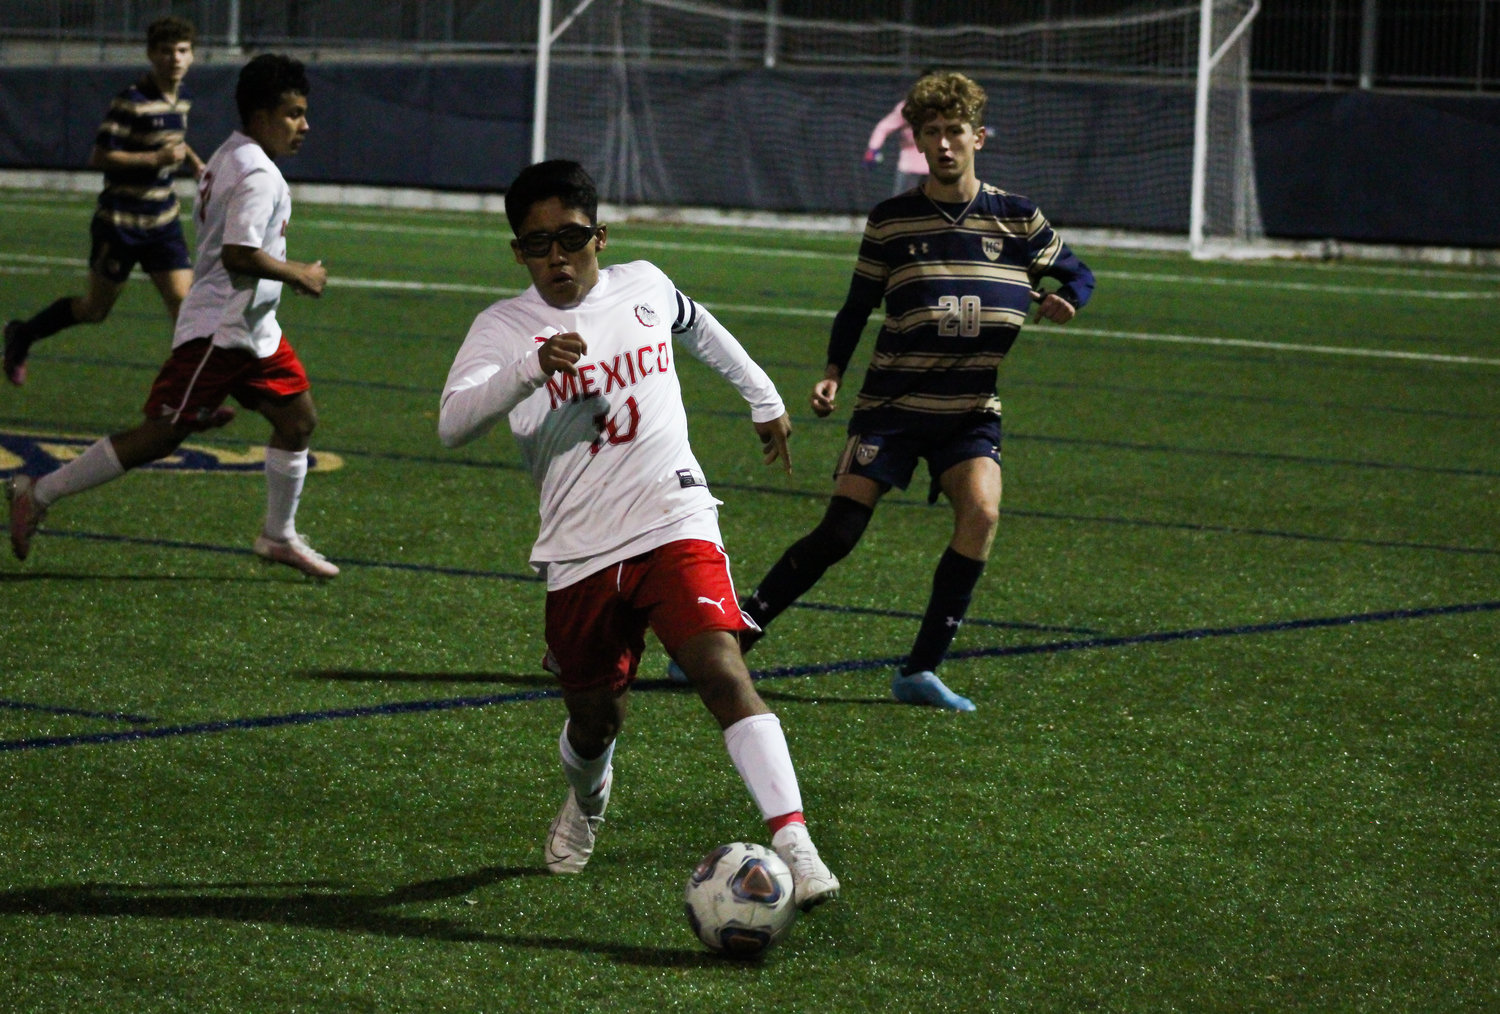 Mexico senior midfielder Fernando Guzman takes control of the ball Thursday in an 8-1 loss at Helias Catholic in Jefferson City. On Wednesday, Guzman was named to the North Central Missouri Conference team along with goalkeeper Emille Scanavino and defender Declan Gleeson.